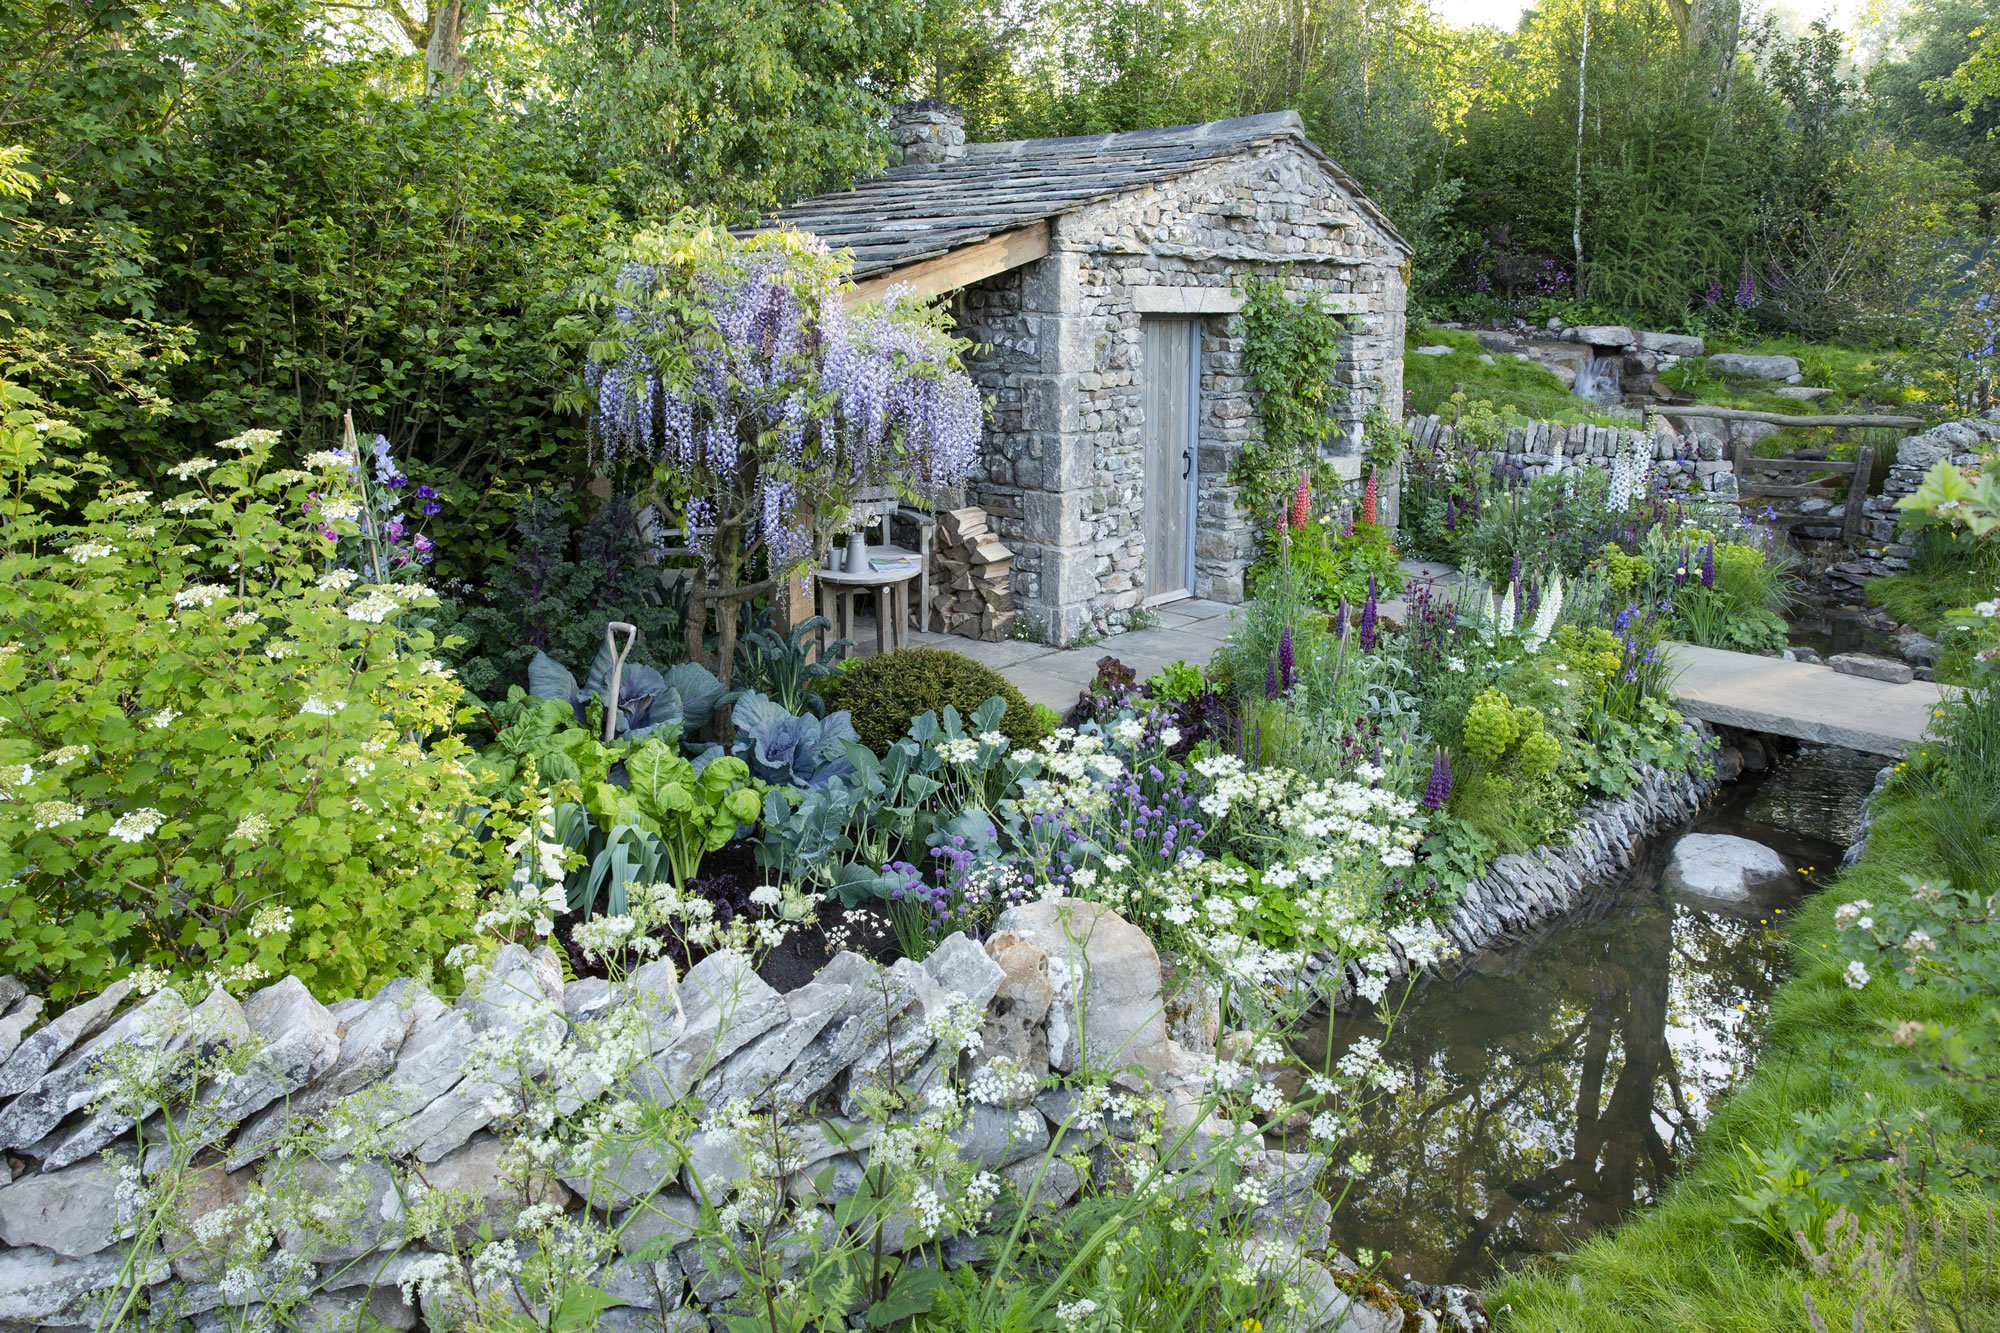 Image name wtylandformchelsea19 1 the 17 image from the post <strong>Welcome to Yorkshire Chelsea Garden Wins BBC RHS People’s Choice Award as Garden of the Decade </strong> in Yorkshire.com.